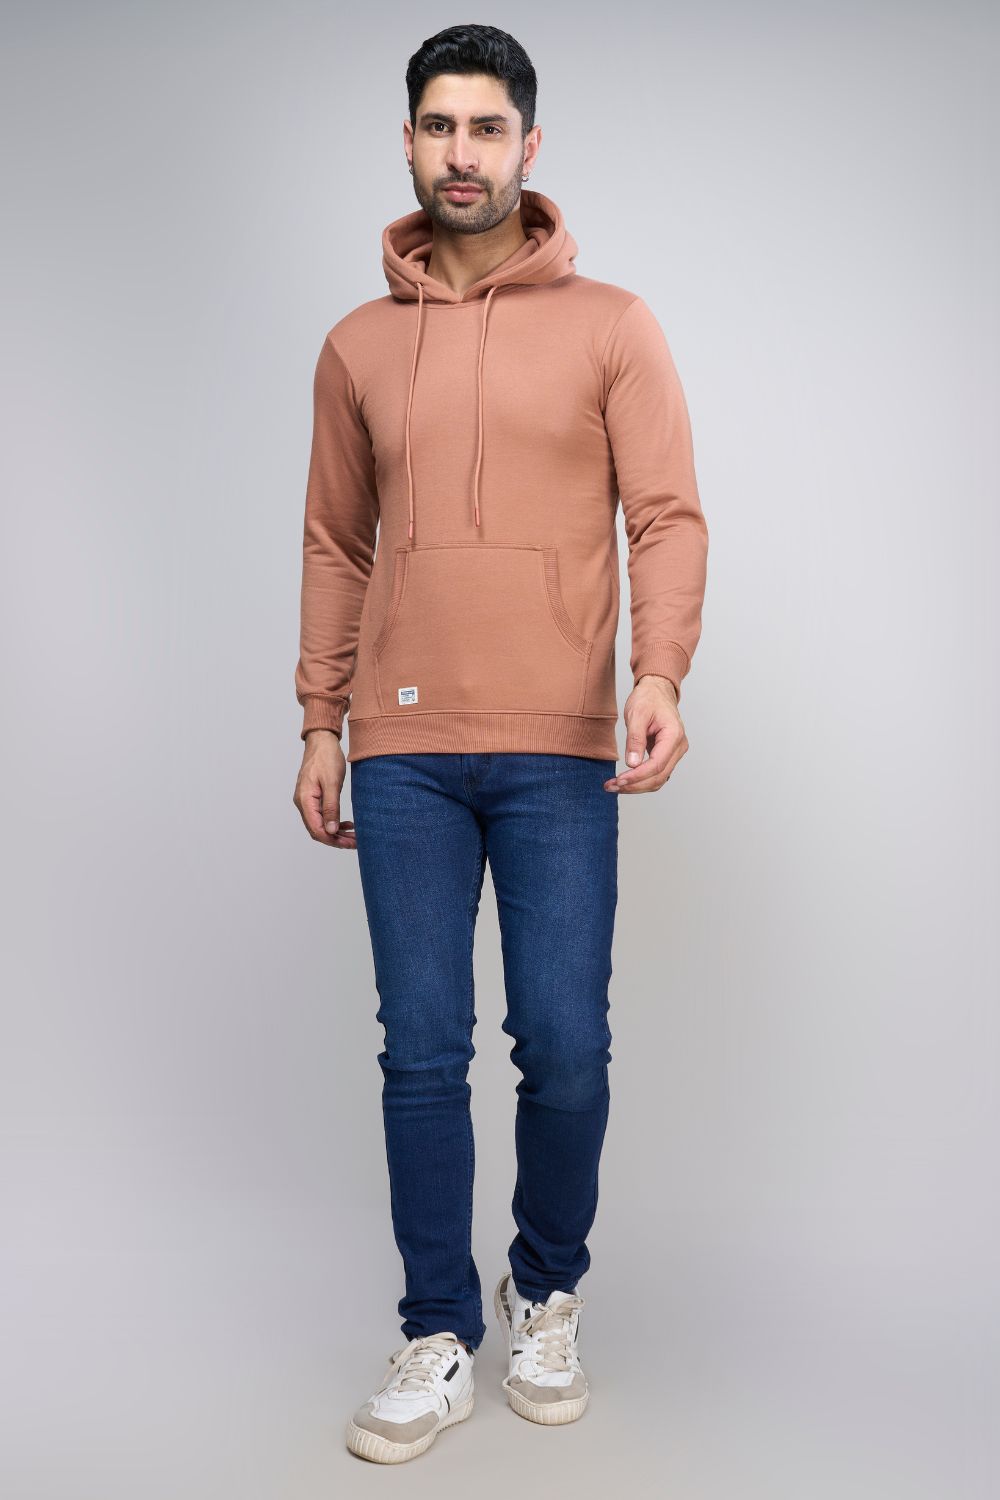 Leather Brown colored, hoodie for men with full sleeves and relaxed fit, front view.